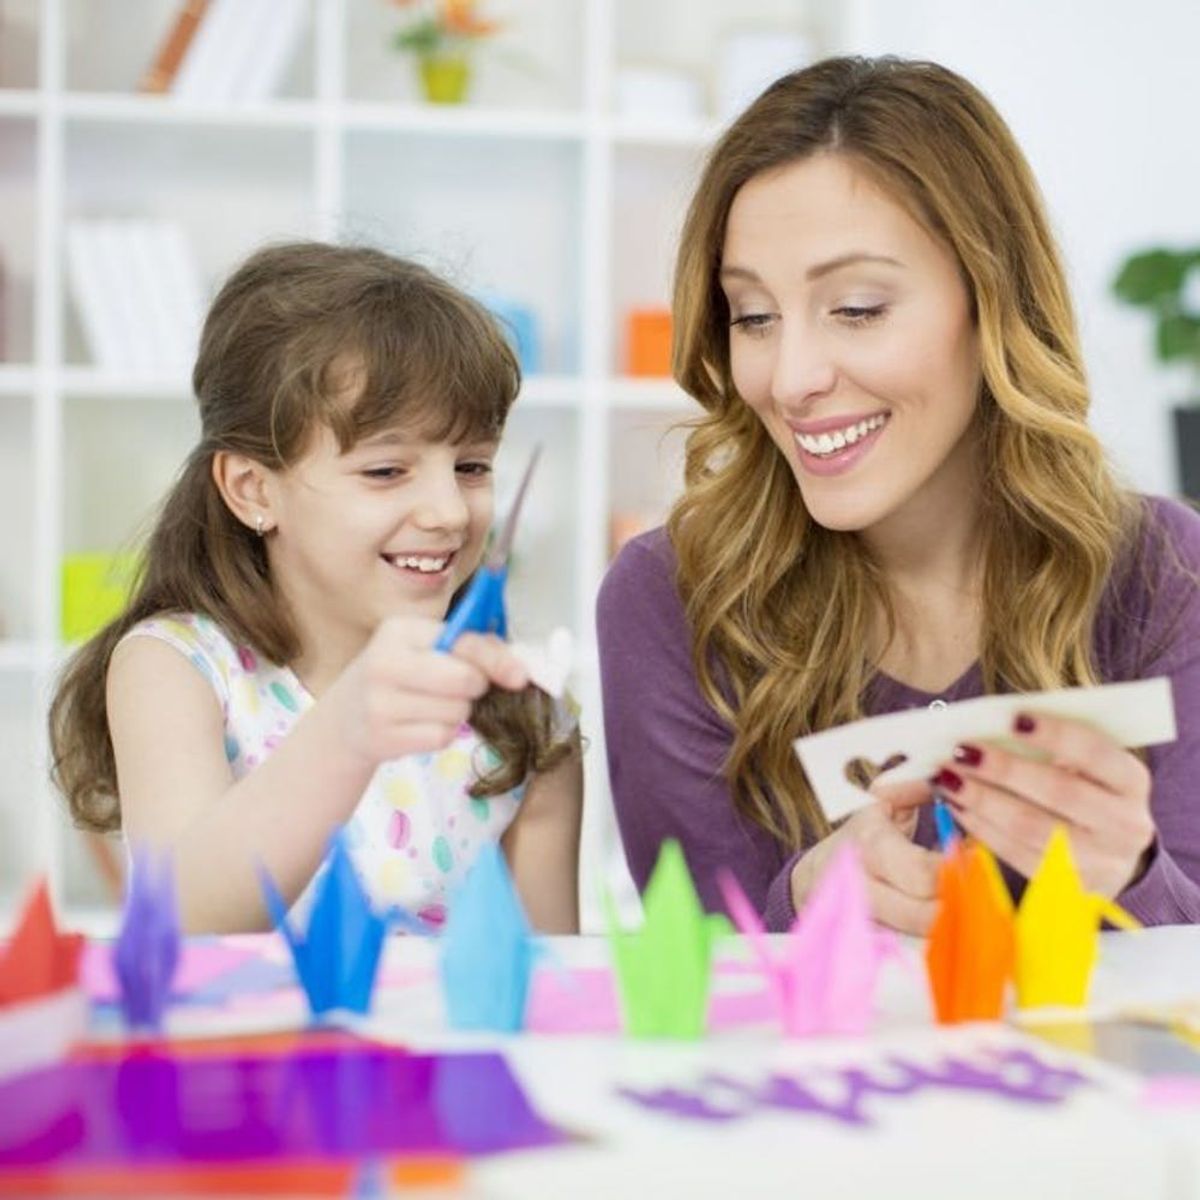 5 Household Things That Are Perfect for DIY Kid Projects